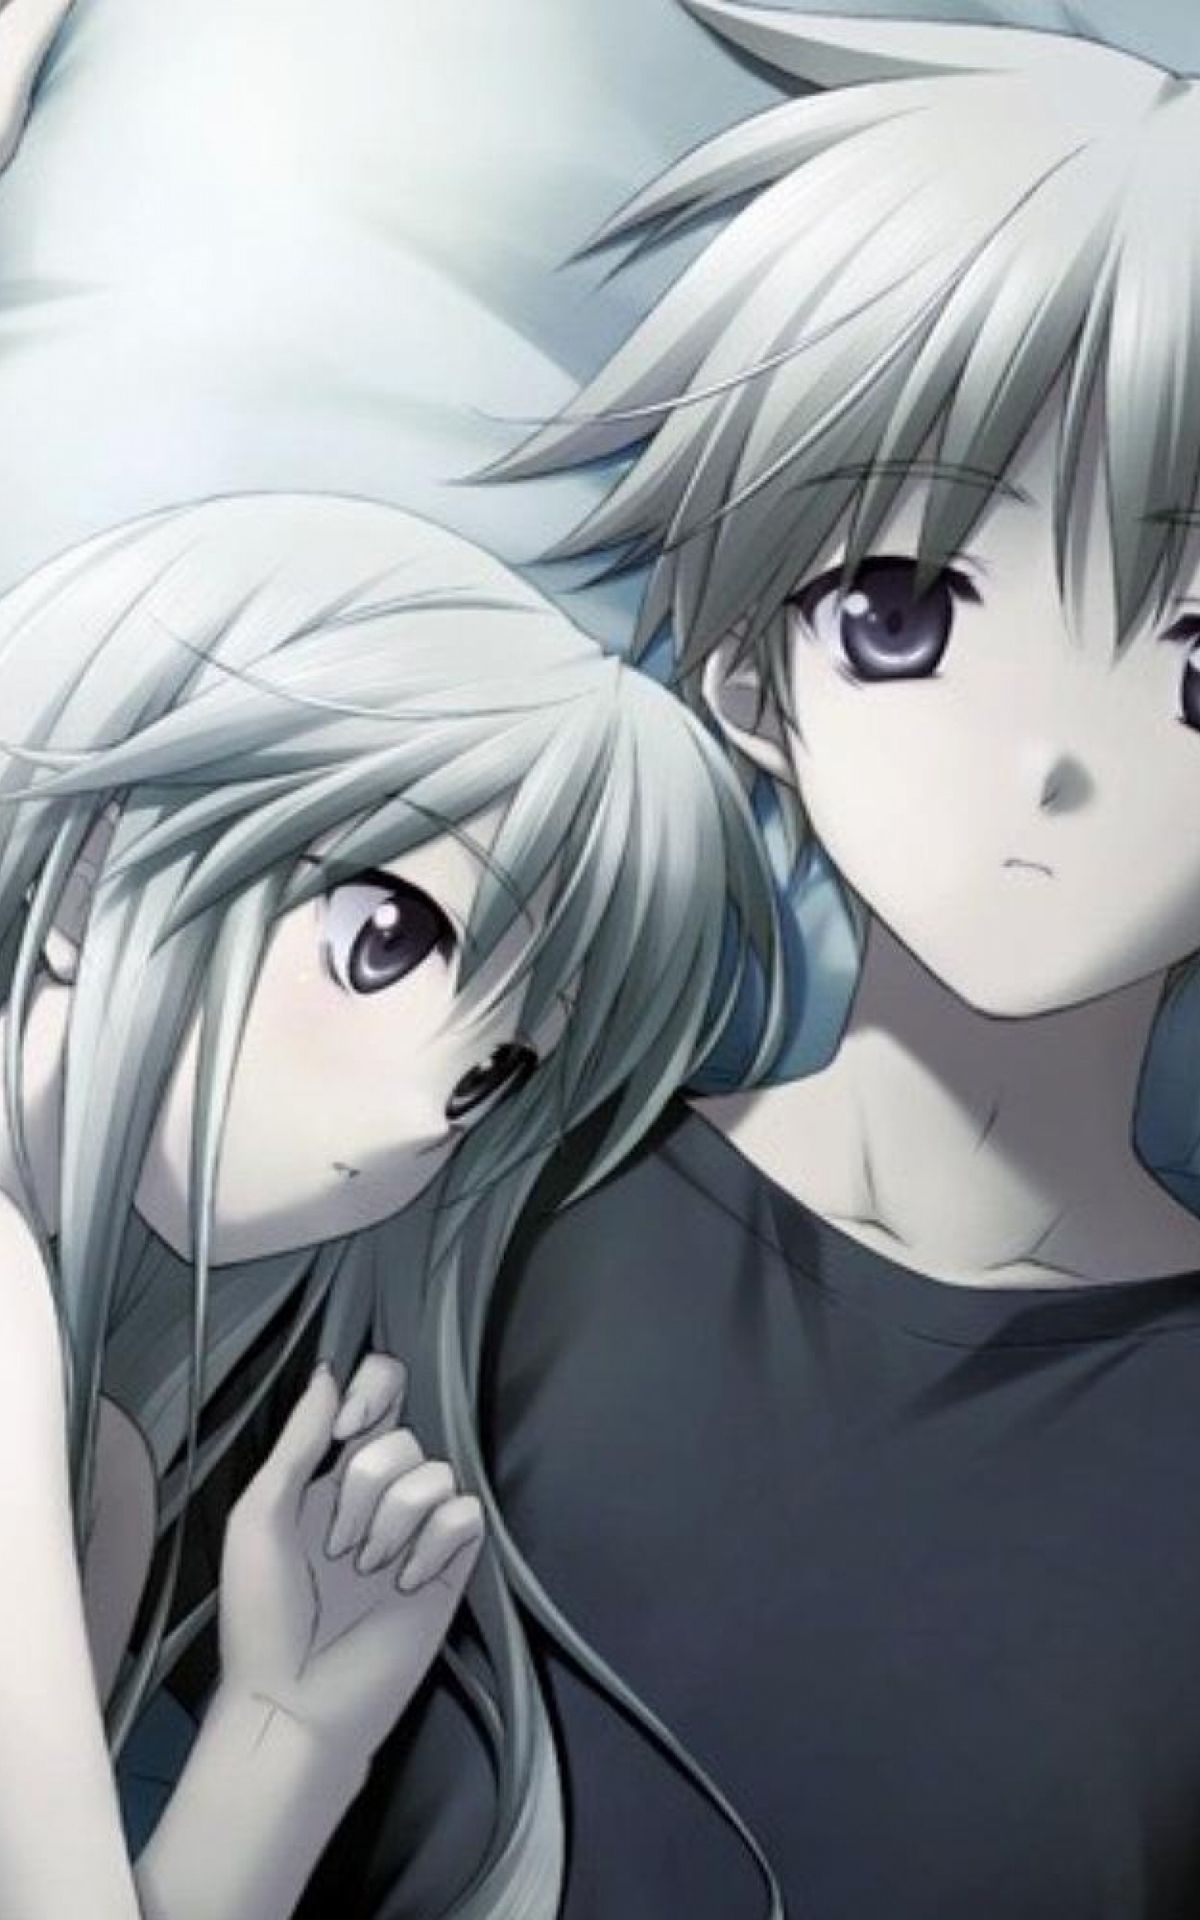 Free download Download Wallpaper 3840x2400 anime couple love bed